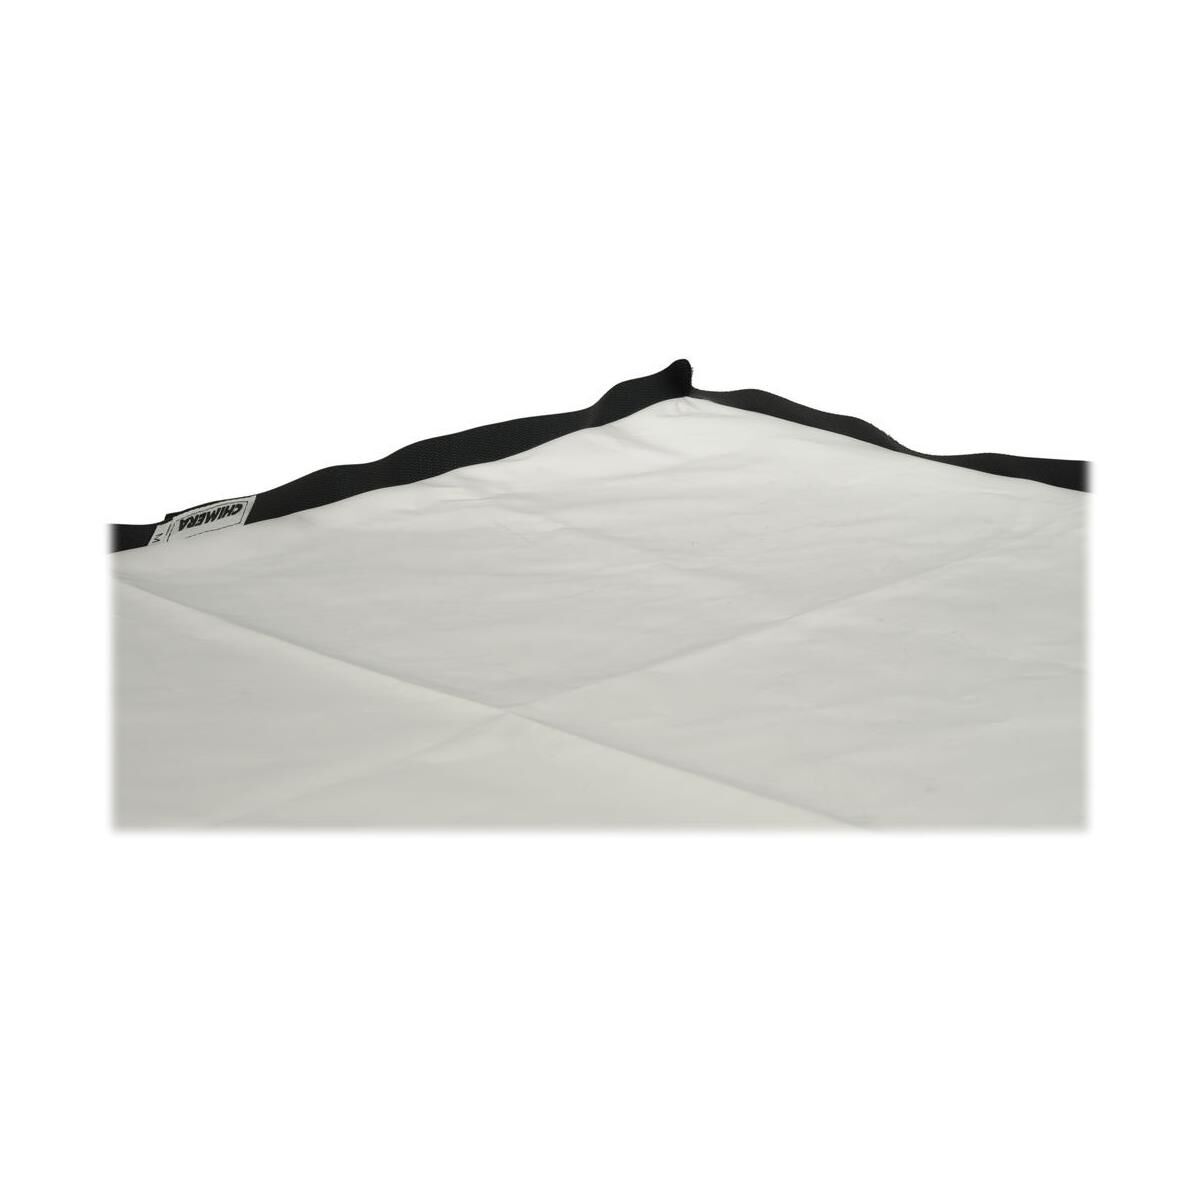 Chimera Front Diffusion Screen for Super, Video Pro Plus Large, 1/2 Grid Cloth